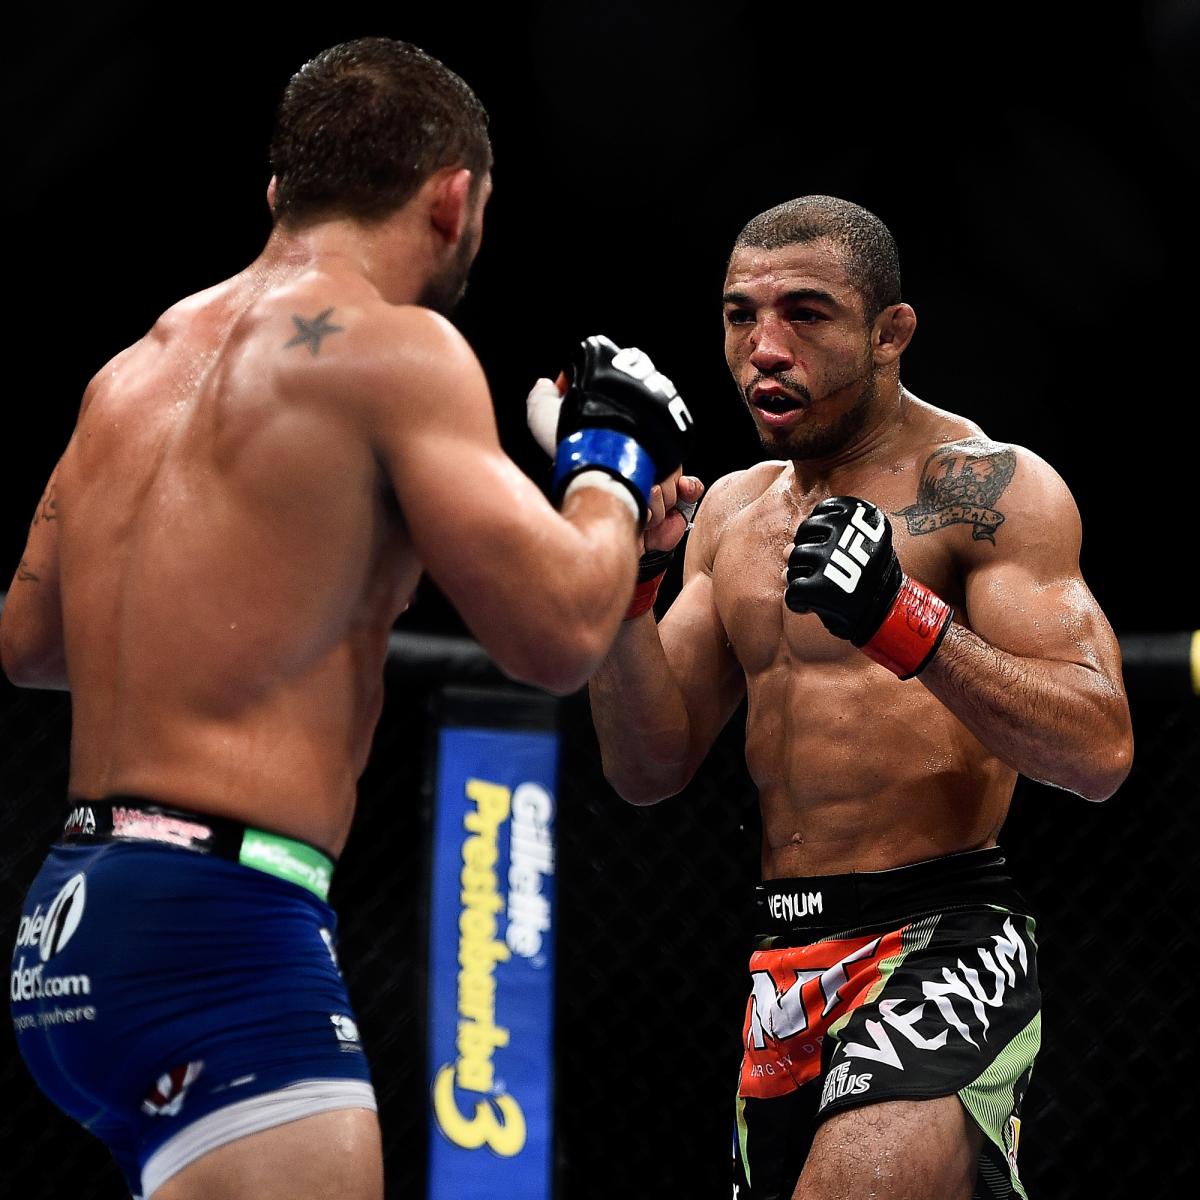 Aldo vs. Mendes 2: Key Stats, Top Moments from Thrilling Rematch at UFC ...